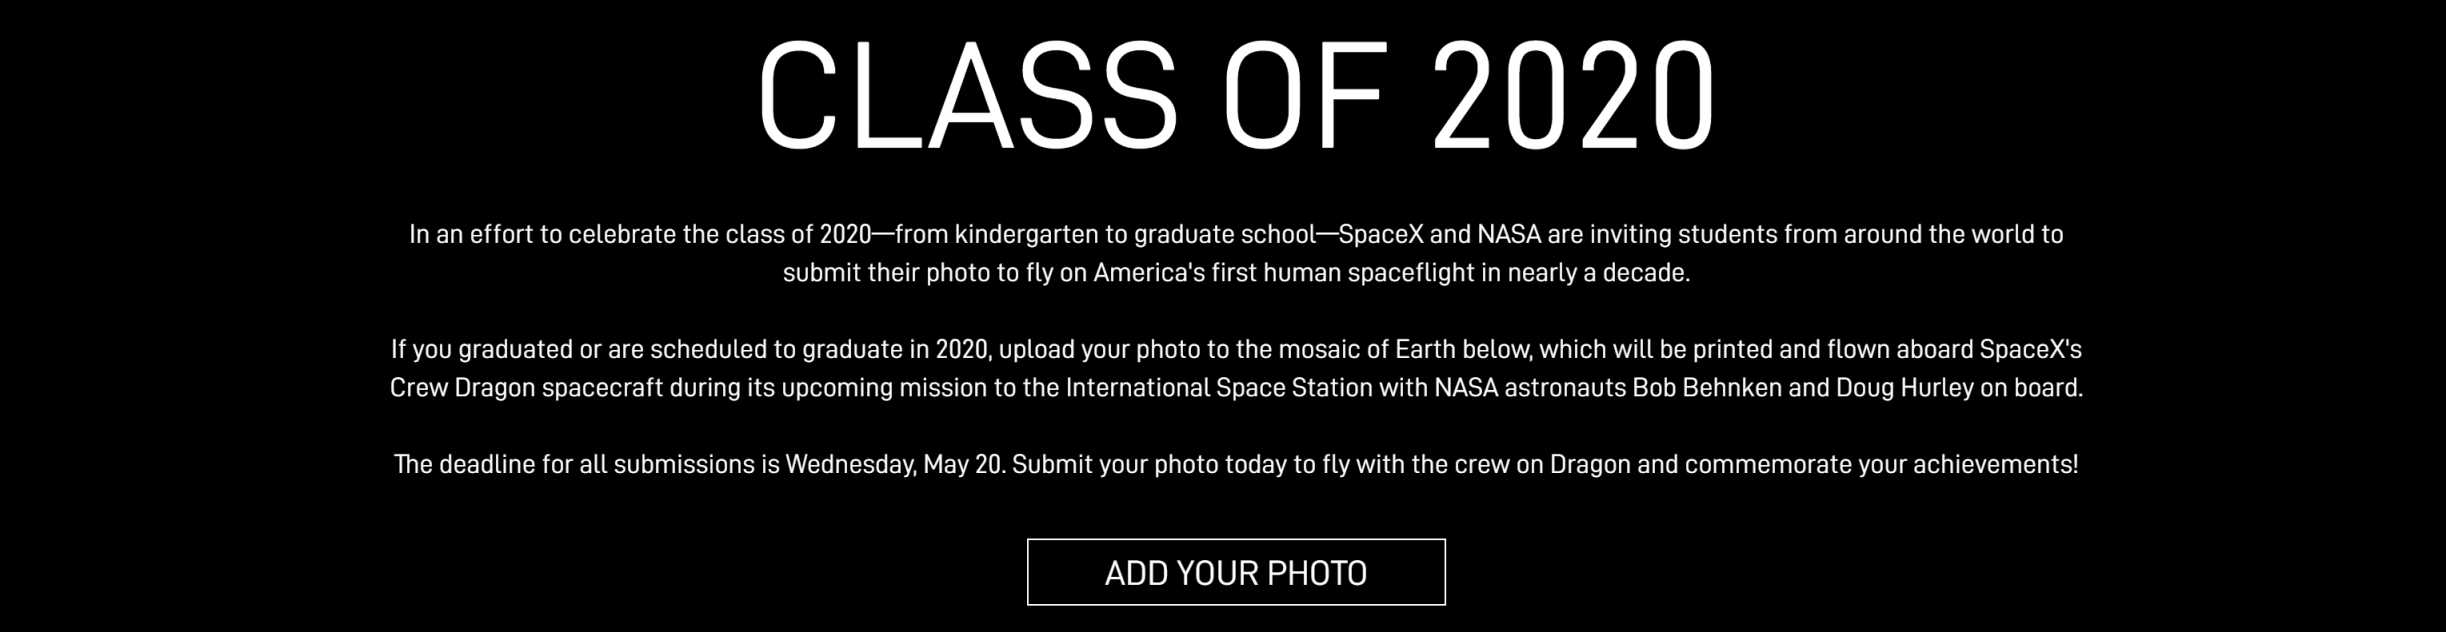 Crew Dragon Earth mosaic class of 2020 celebration (SpaceX) 2